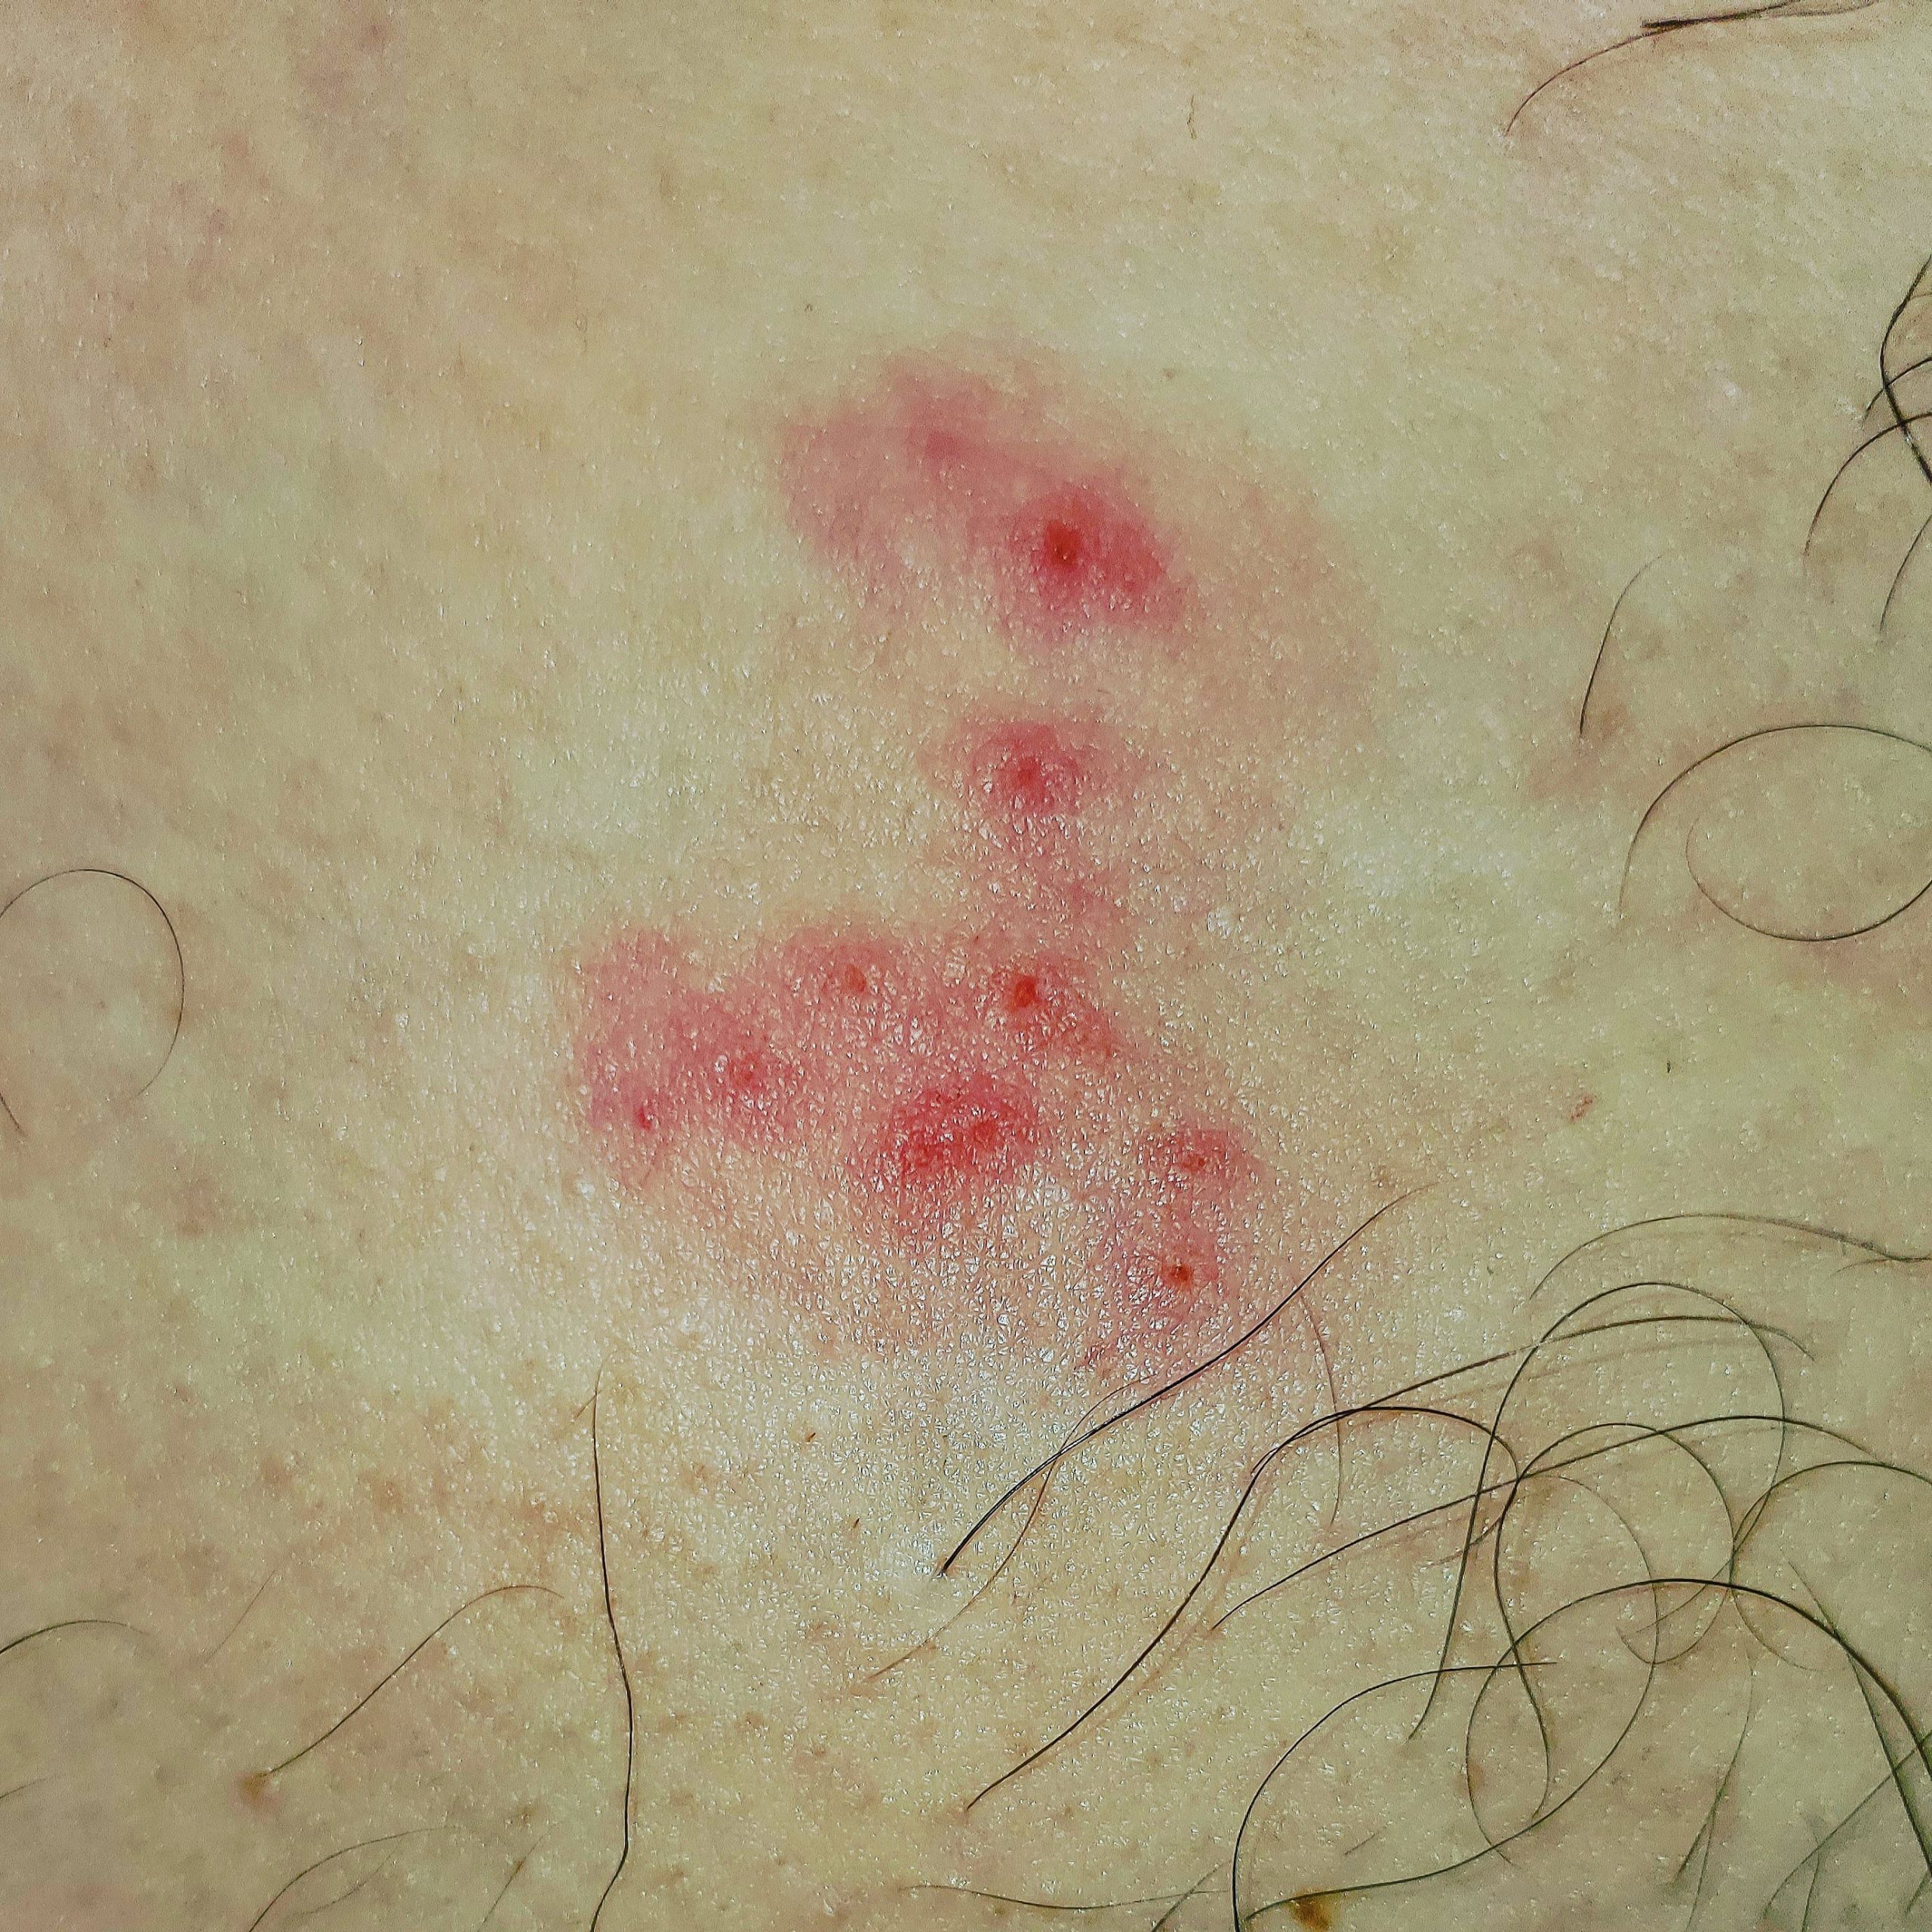 These burn and itch so bad  : shingles